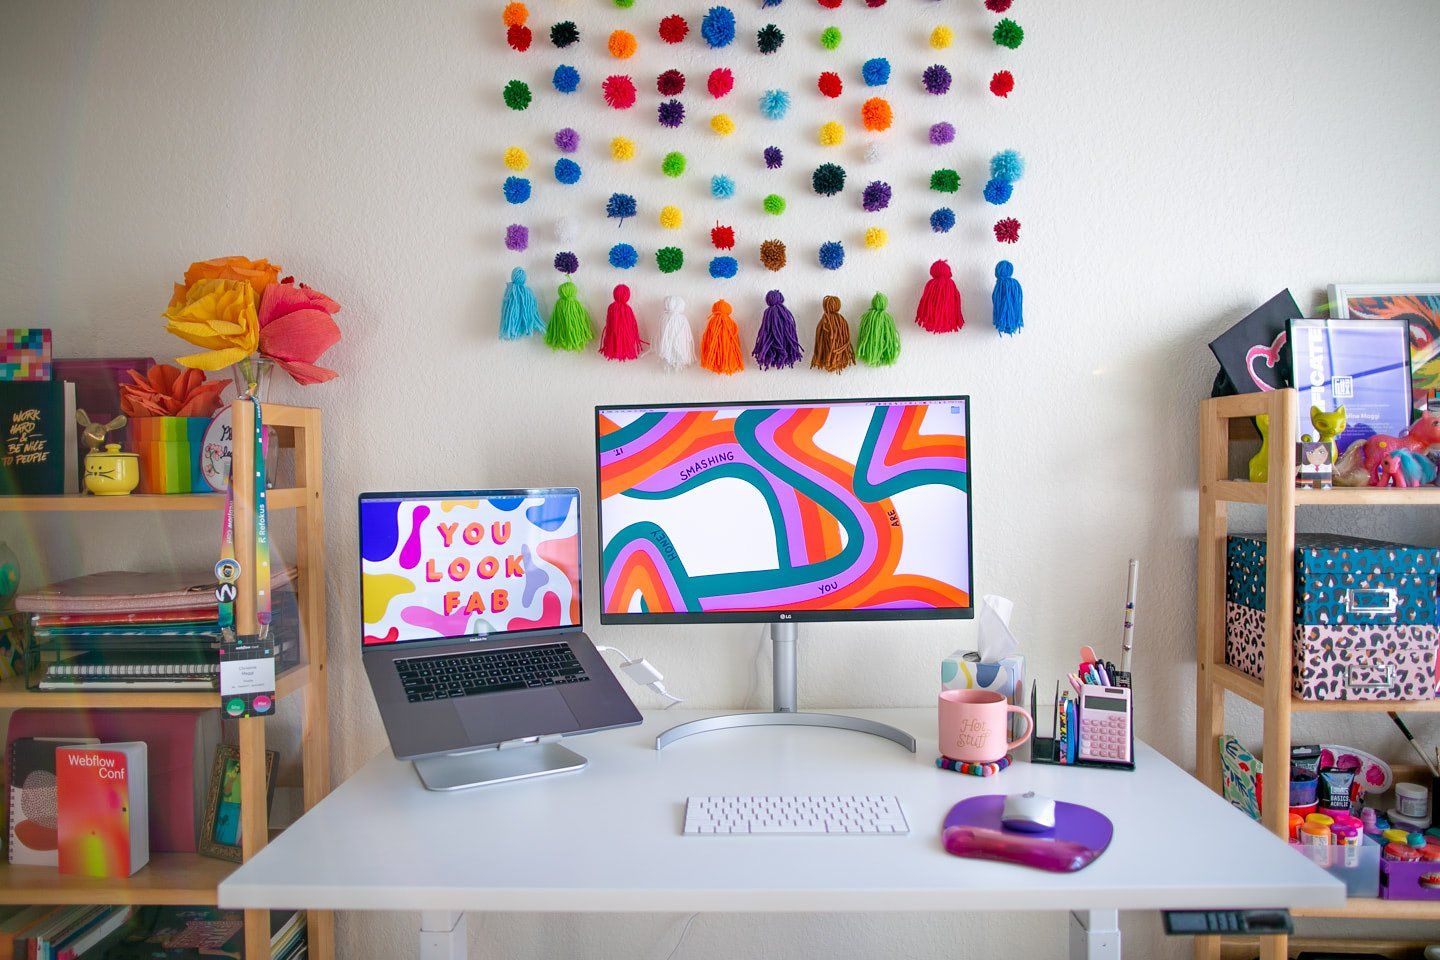 A colourful desk setup with an LG Ultrafine monitor, a MacBook Pro laptop, an Apple Magic keyboard, and a Logitech MX 3 mouse